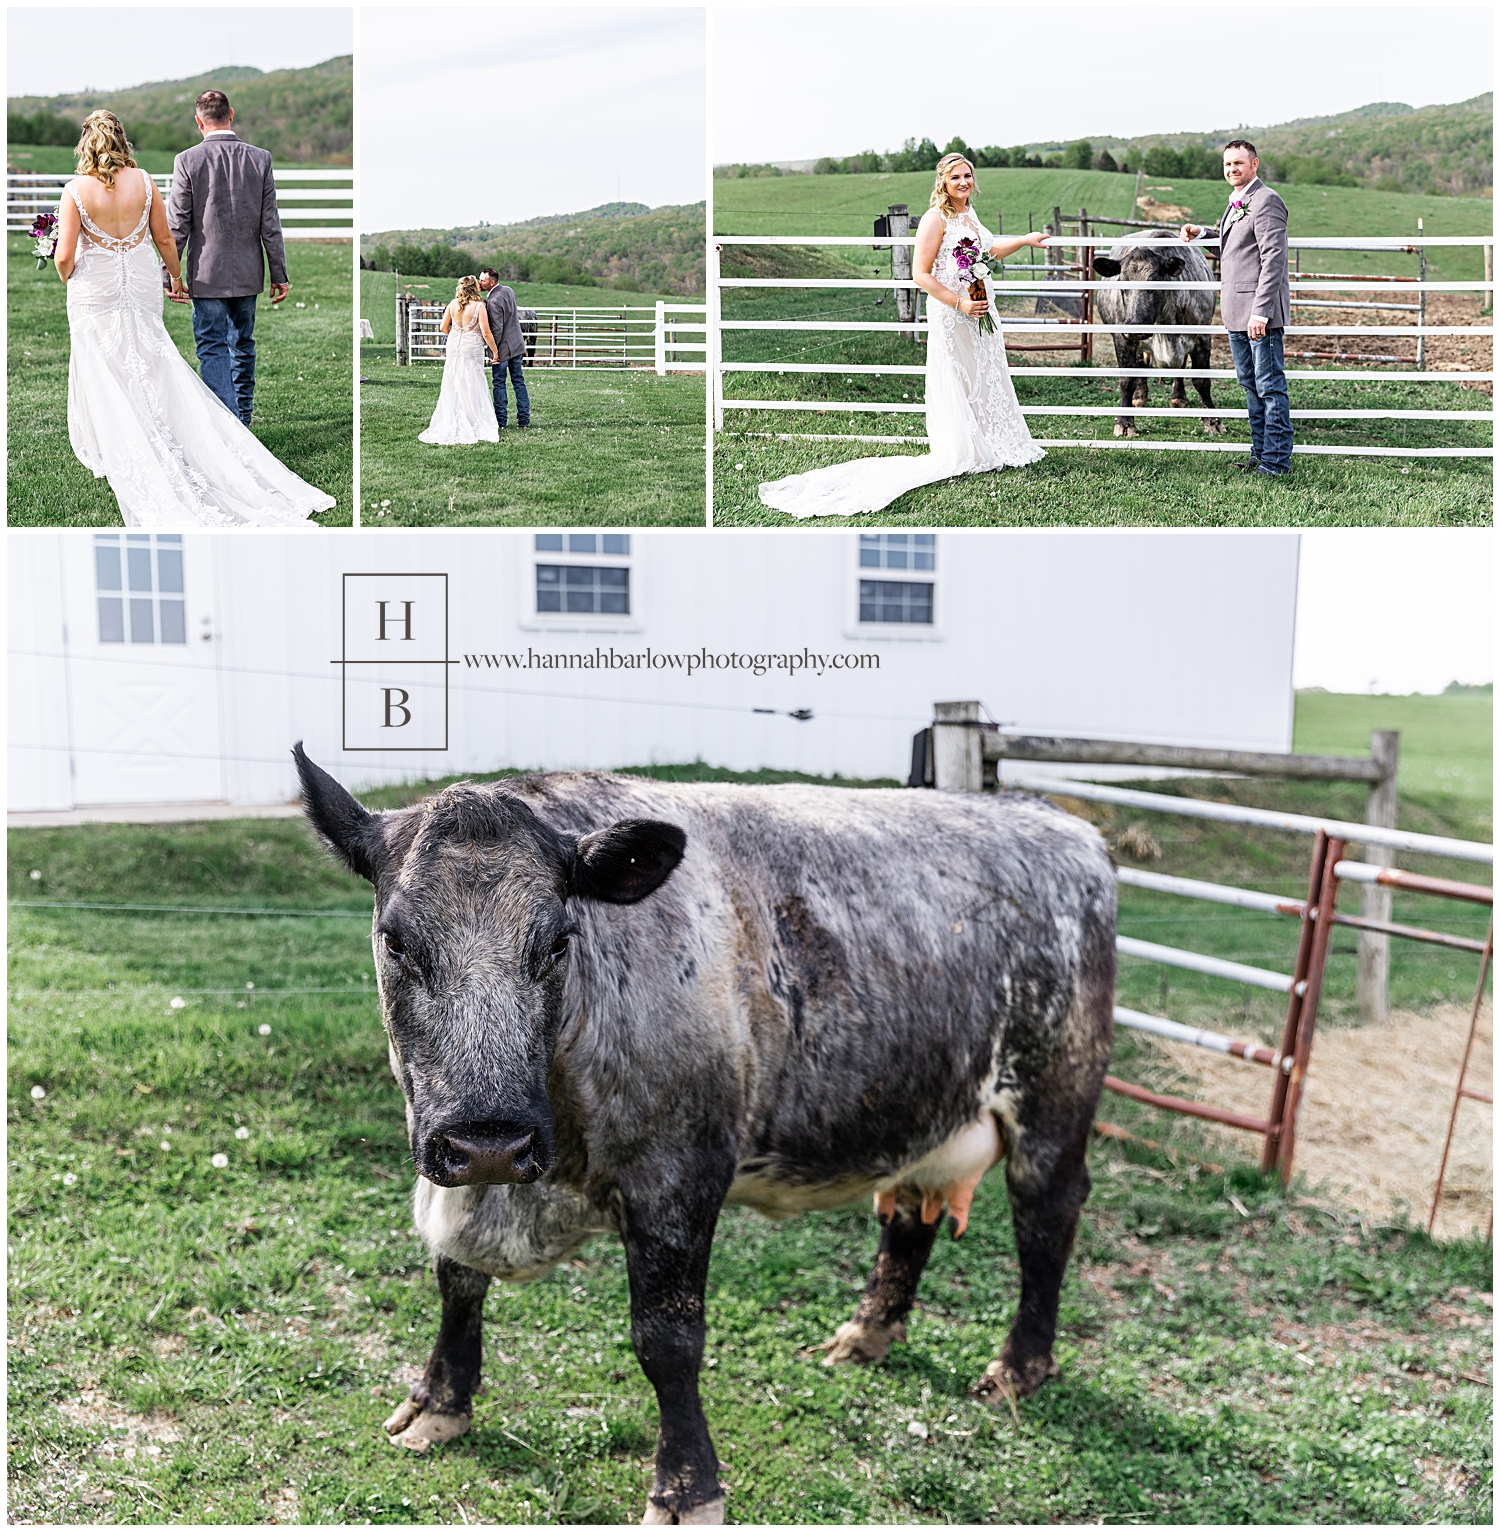 Bride and groom pose with cow by white fence for wedding photos.